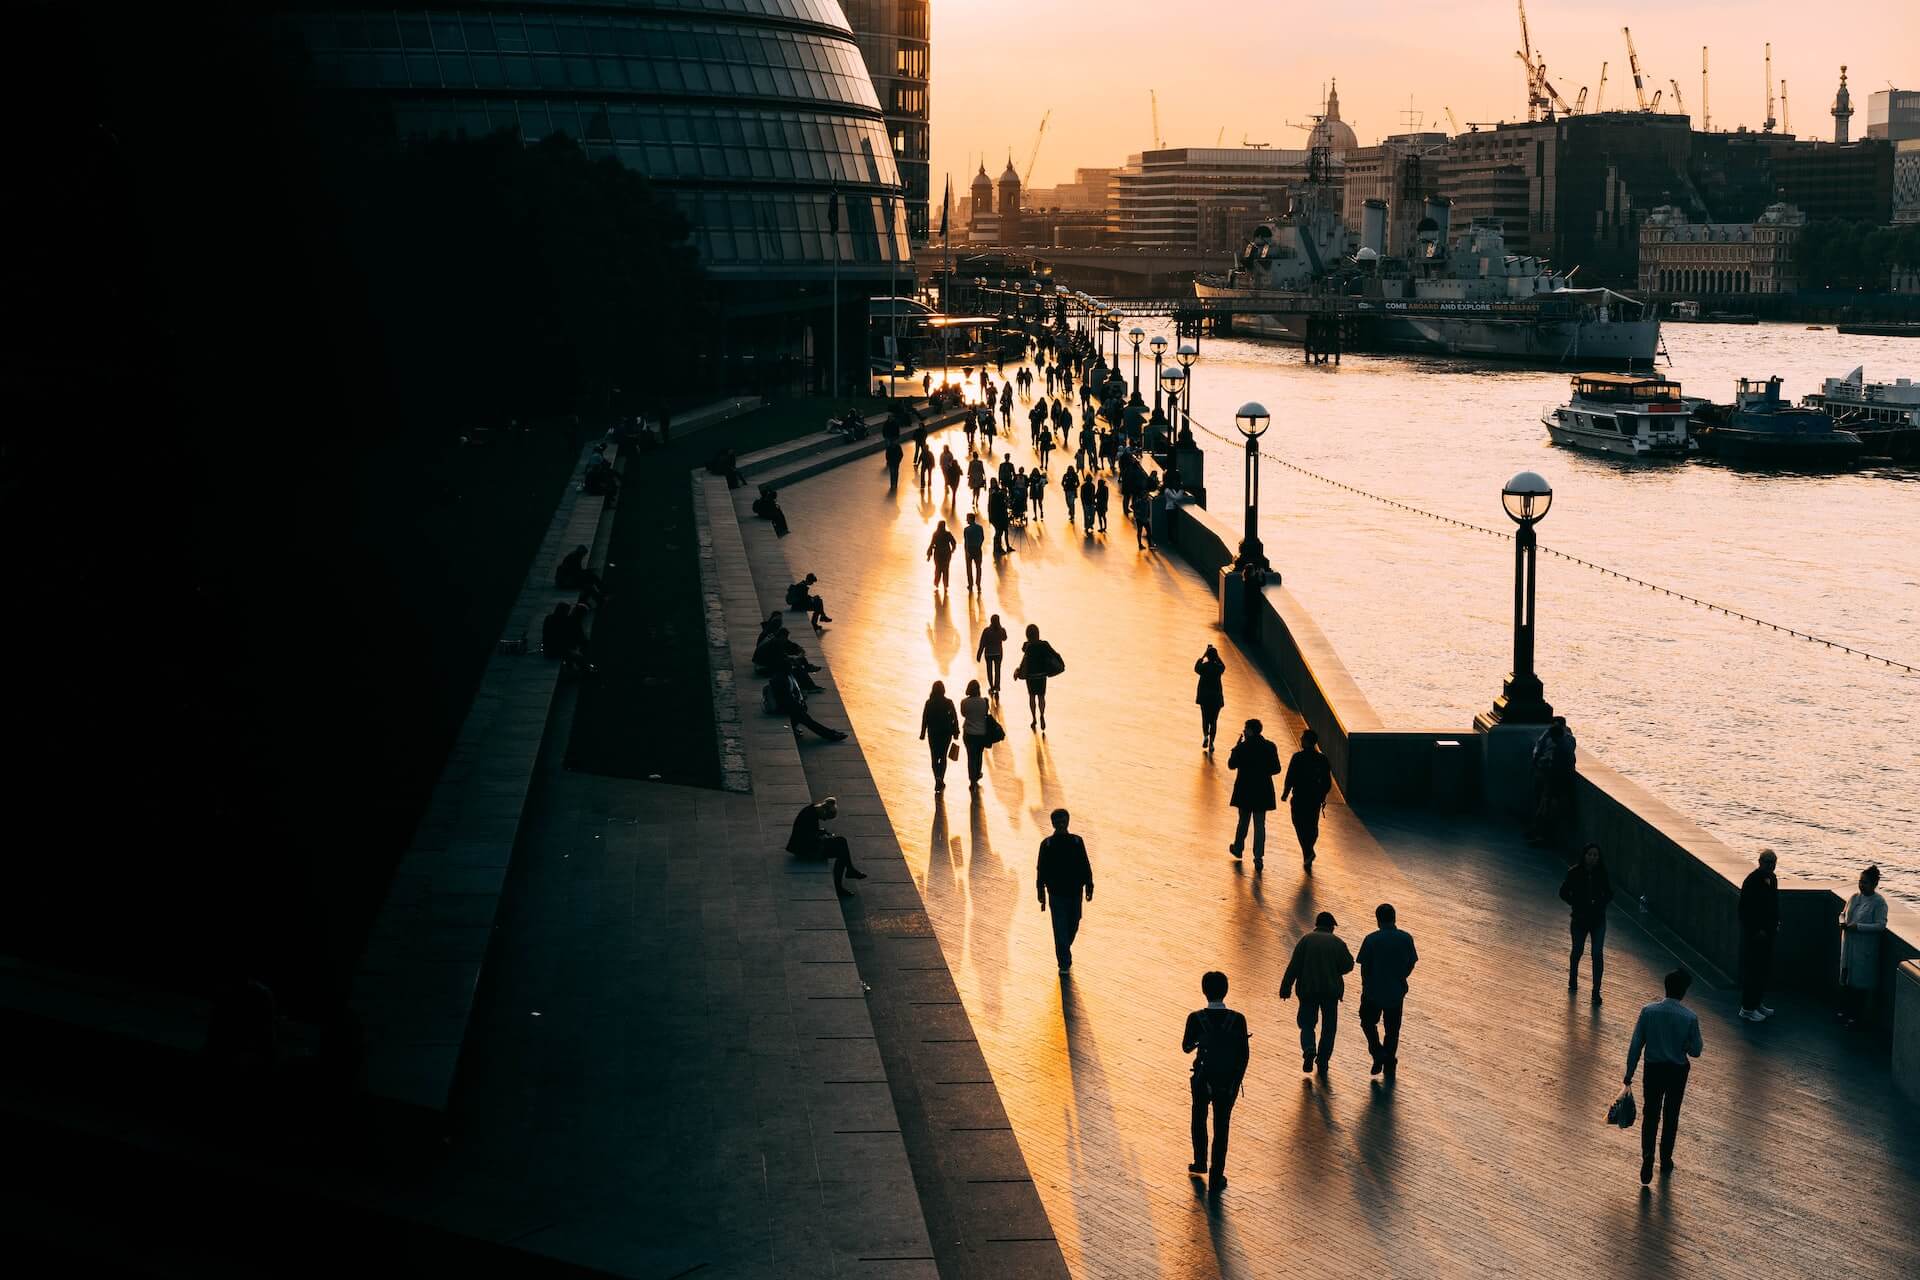 People walking alongside the River Thames in London as the sun sets.